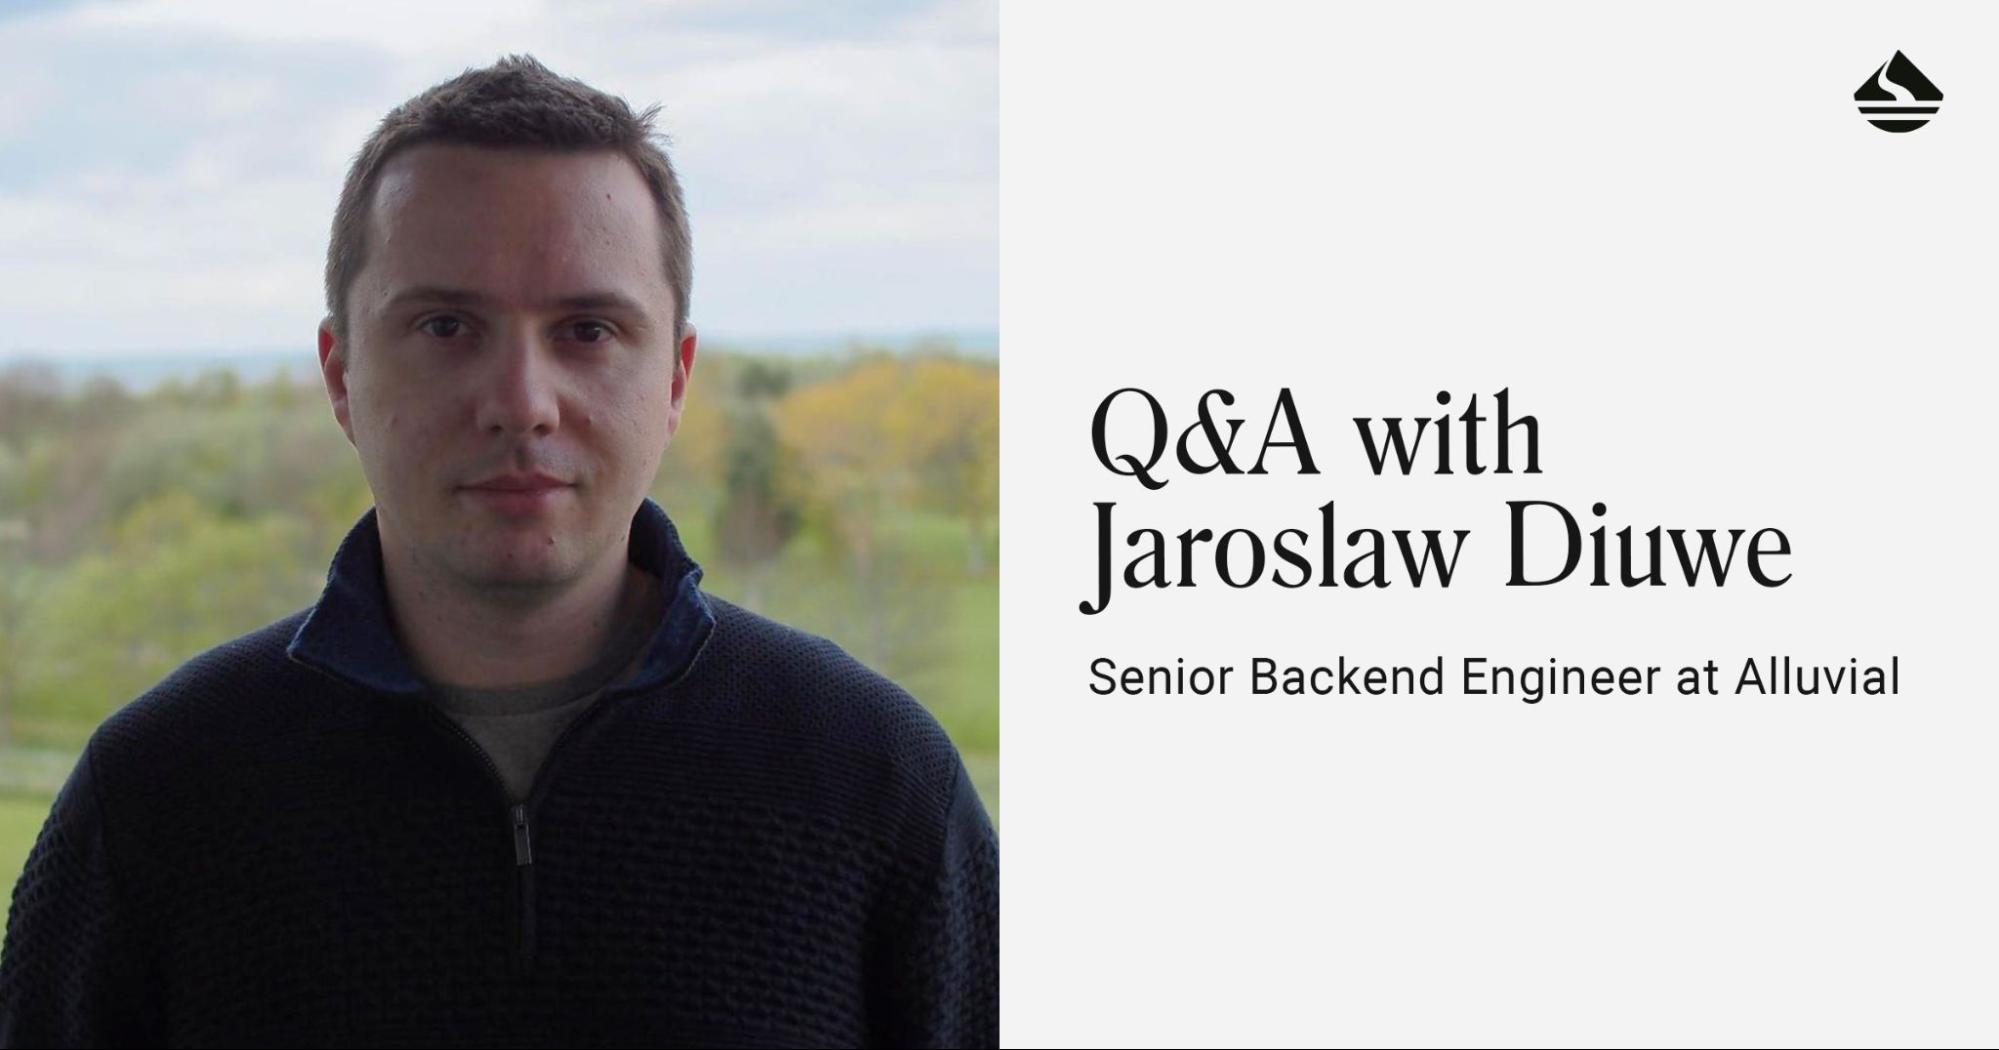 Q&A with Jaroslaw Diuwe, Senior Backend Engineer at Alluvial